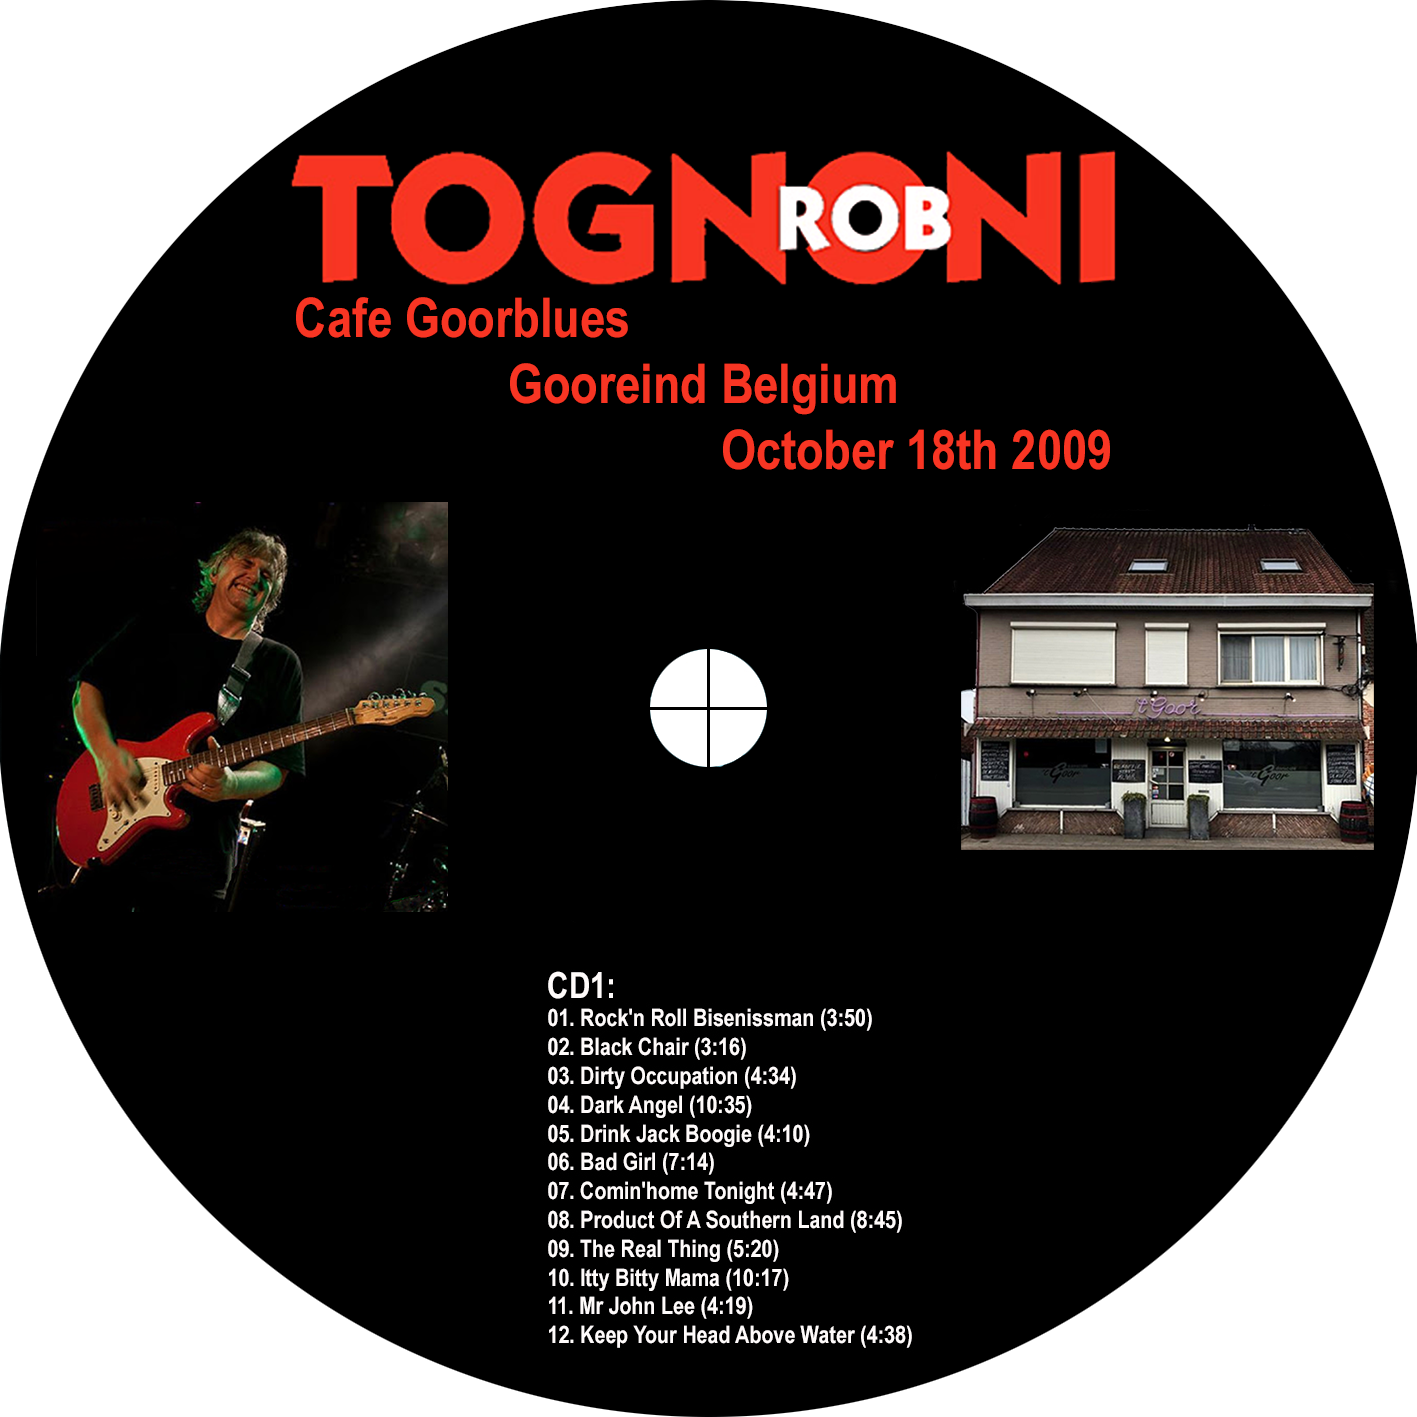 rob tognoni 2009 10 18 cd live at cafe goorblues label 1